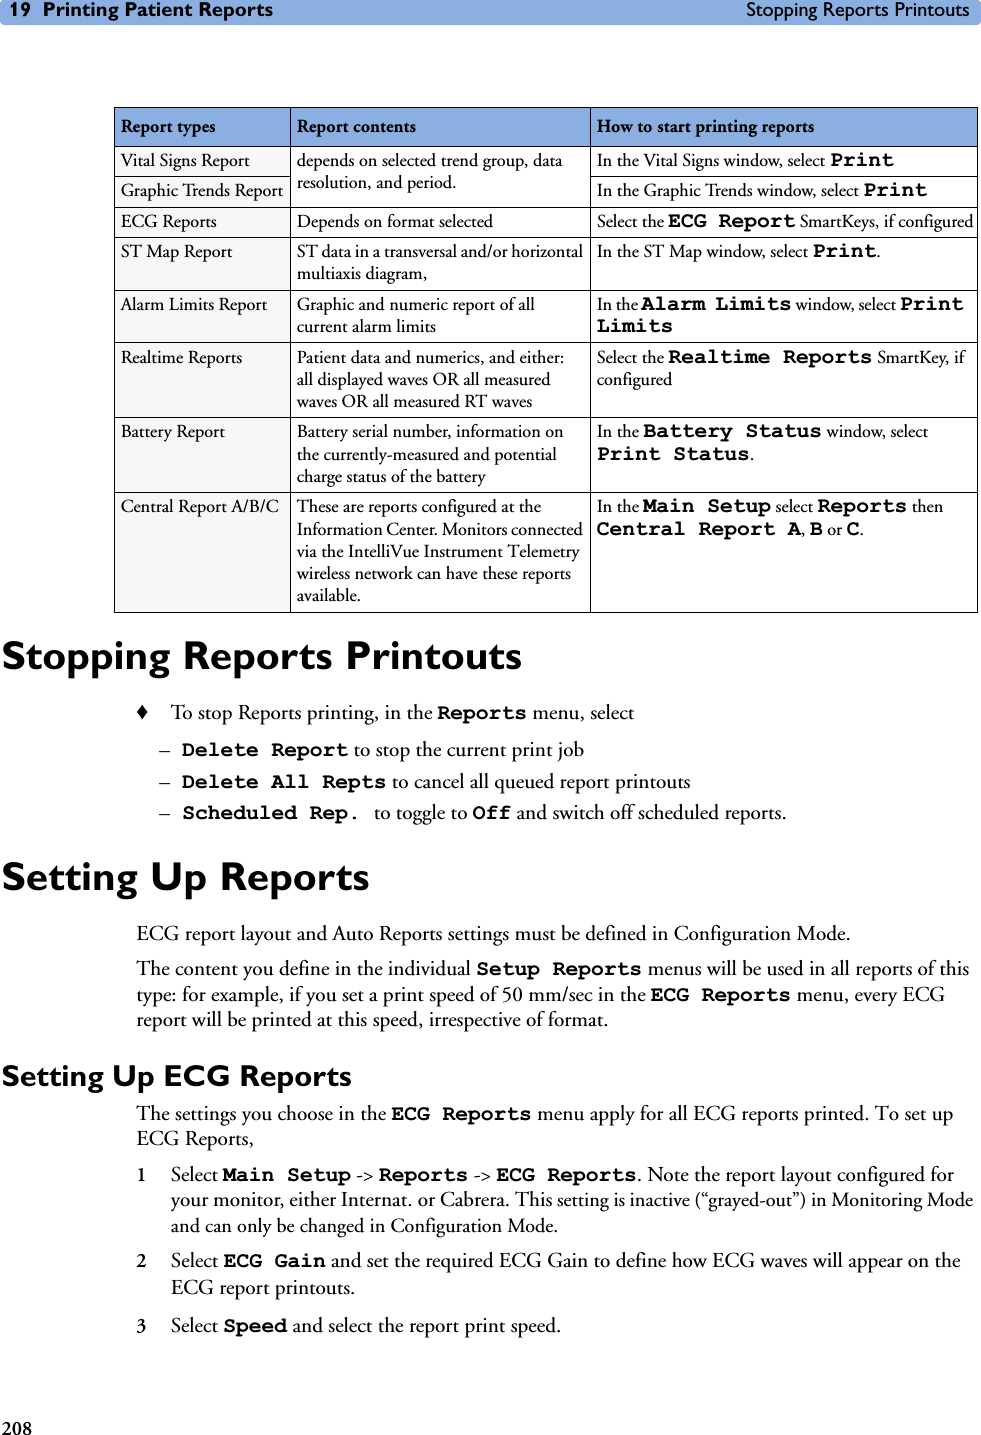 19 Printing Patient Reports Stopping Reports Printouts208Stopping Reports Printouts♦To stop Reports printing, in the Reports menu, select –Delete Report to stop the current print job –Delete All Repts to cancel all queued report printouts–Scheduled Rep. to toggle to Off and switch off scheduled reports.Setting Up ReportsECG report layout and Auto Reports settings must be defined in Configuration Mode. The content you define in the individual Setup Reports menus will be used in all reports of this type: for example, if you set a print speed of 50 mm/sec in the ECG Reports menu, every ECG report will be printed at this speed, irrespective of format.Setting Up ECG ReportsThe settings you choose in the ECG Reports menu apply for all ECG reports printed. To set up ECG Reports, 1Select Main Setup -&gt; Reports -&gt; ECG Reports. Note the report layout configured for your monitor, either Internat. or Cabrera. This setting is inactive (“grayed-out”) in Monitoring Mode and can only be changed in Configuration Mode. 2Select ECG Gain and set the required ECG Gain to define how ECG waves will appear on the ECG report printouts. 3Select Speed and select the report print speed.Report types Report contents How to start printing reportsVital Signs Report depends on selected trend group, data resolution, and period.In the Vital Signs window, select PrintGraphic Trends Report In the Graphic Trends window, select PrintECG Reports Depends on format selected Select the ECG Report SmartKeys, if configuredST Map Report ST data in a transversal and/or horizontal multiaxis diagram, In the ST Map window, select Print.Alarm Limits Report Graphic and numeric report of all current alarm limitsIn the Alarm Limits window, select Print LimitsRealtime Reports Patient data and numerics, and either: all displayed waves OR all measured waves OR all measured RT wavesSelect the Realtime Reports SmartKey, if configuredBattery Report Battery serial number, information on the currently-measured and potential charge status of the batteryIn the Battery Status window, select Print Status.Central Report A/B/C These are reports configured at the Information Center. Monitors connected via the IntelliVue Instrument Telemetry wireless network can have these reports available.In the Main Setup select Reports then Central Report A, B or C.